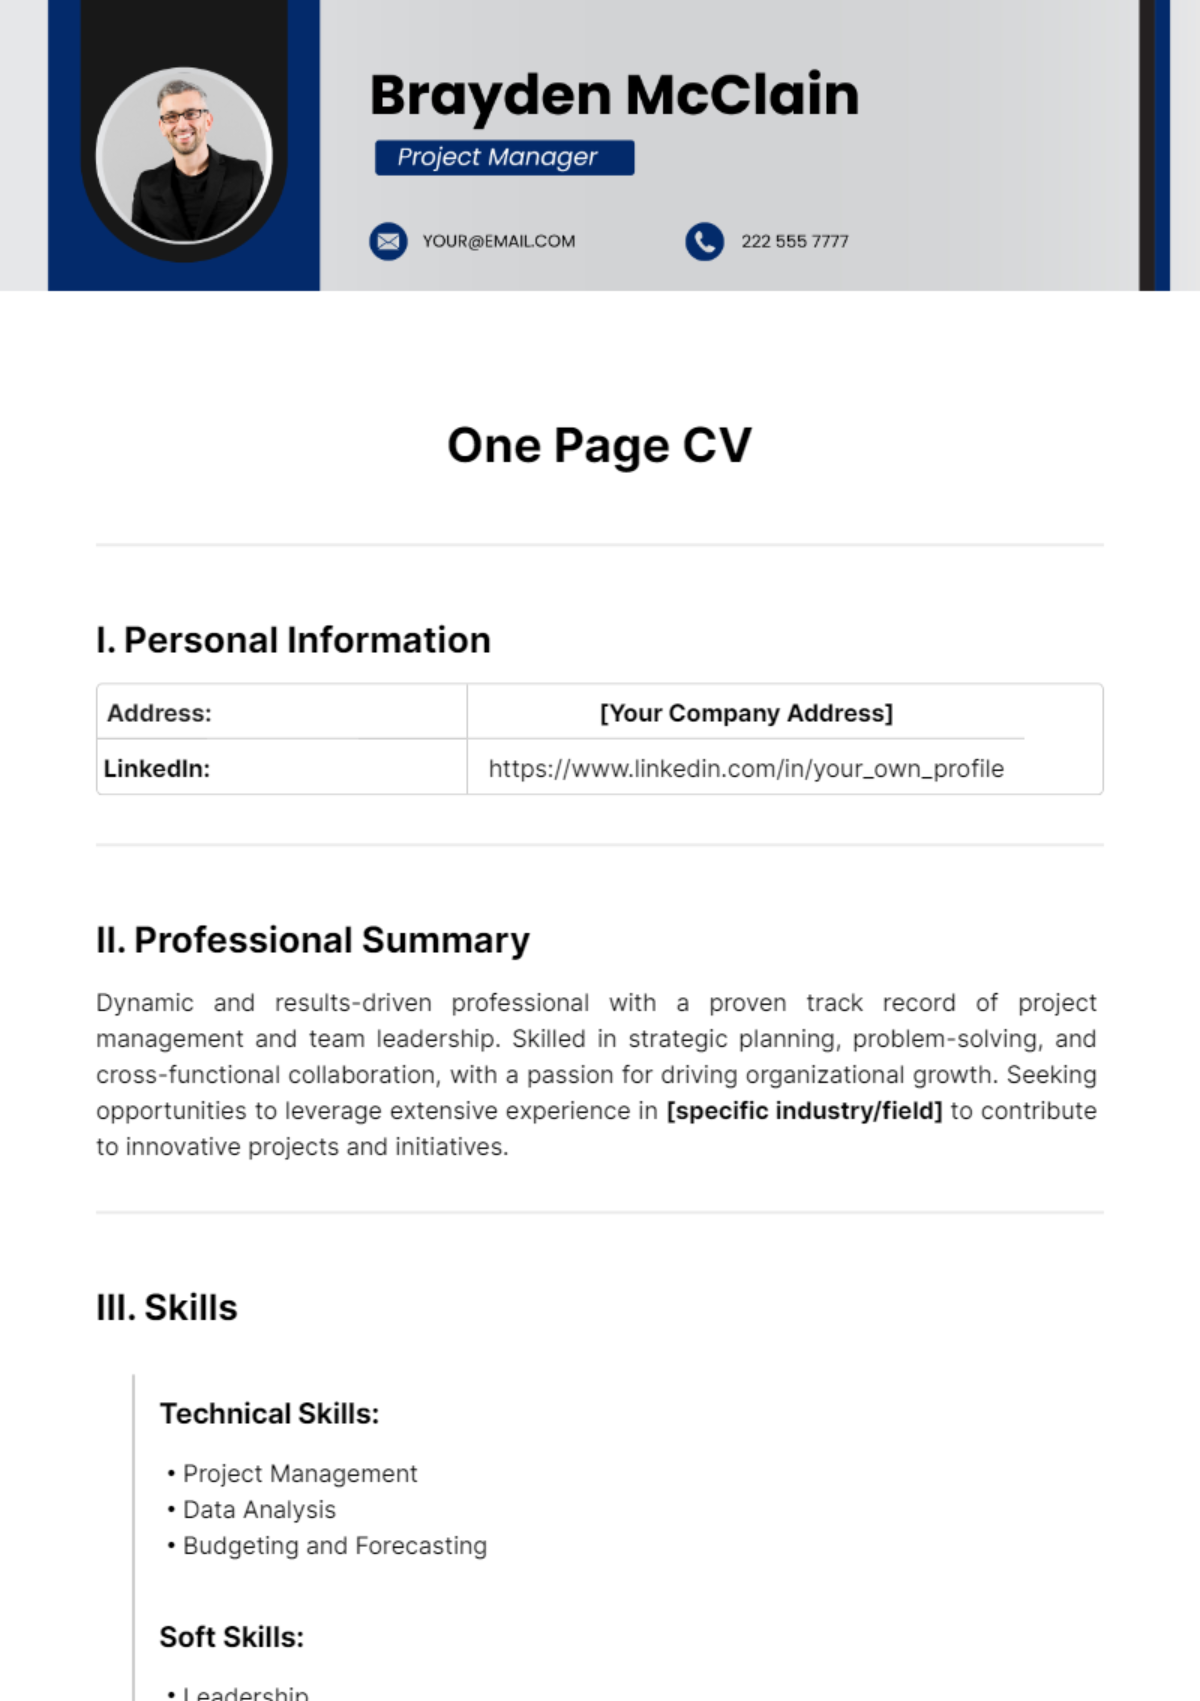 One Page CV Template